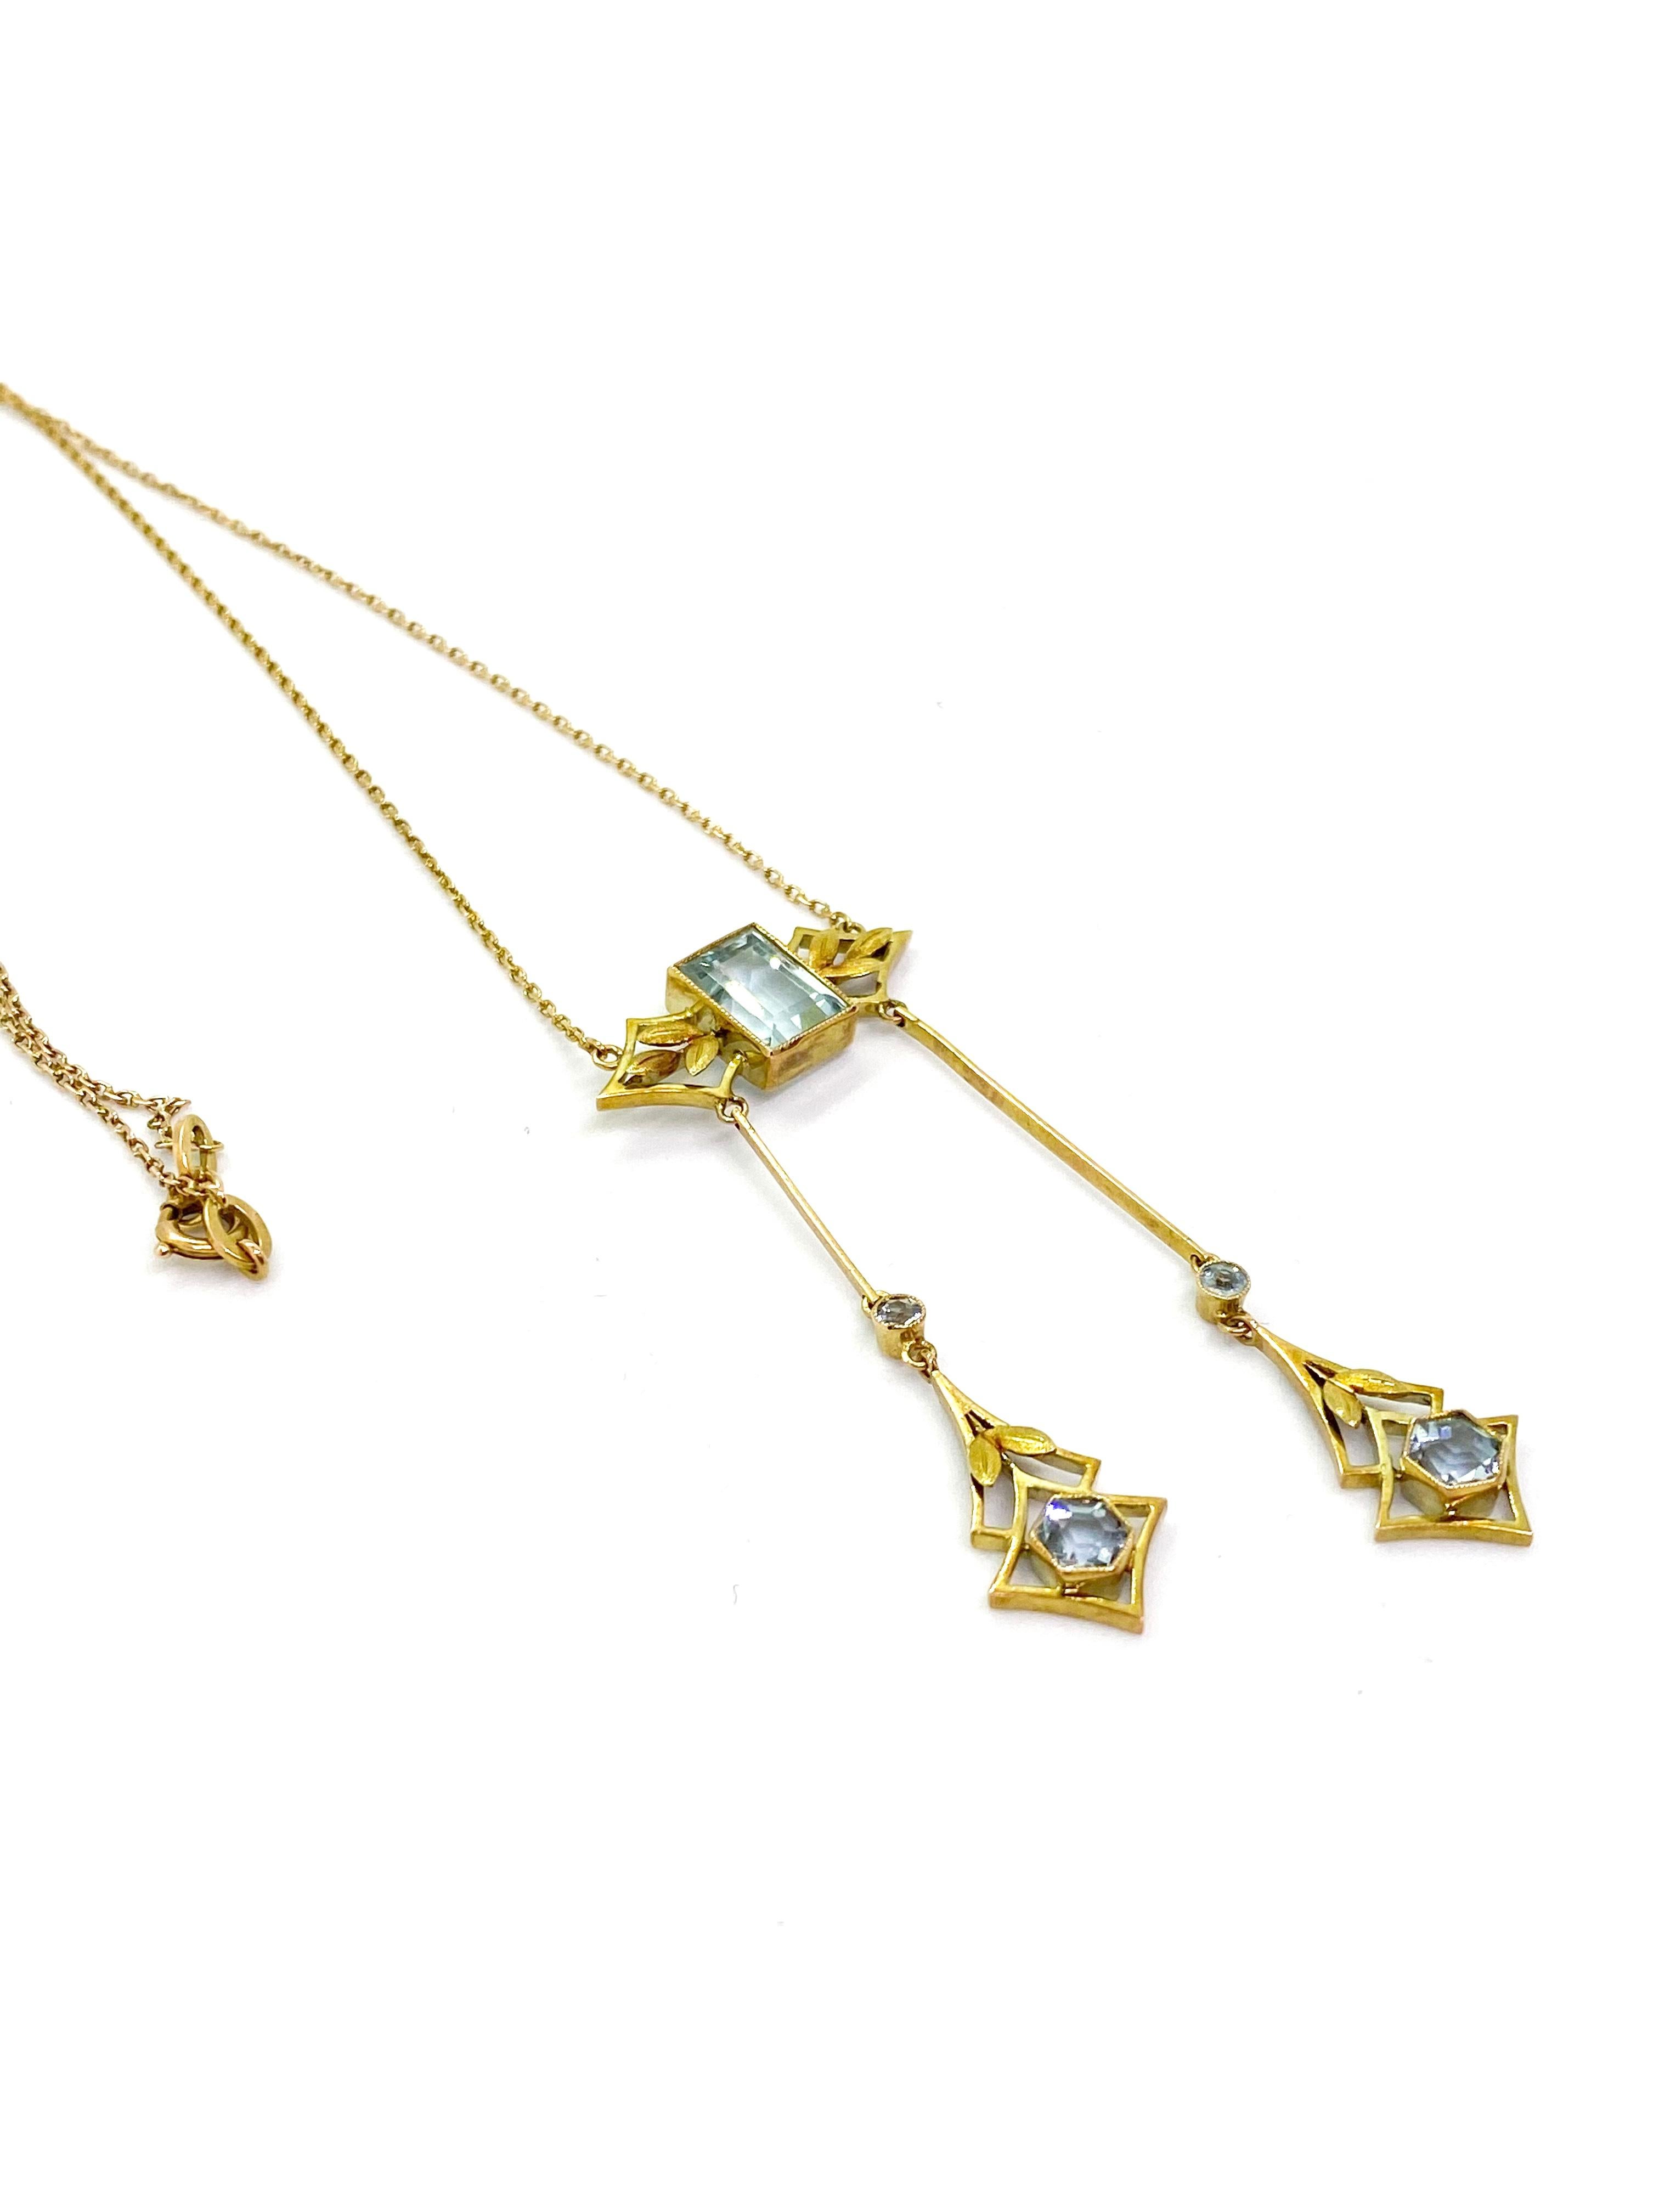 14 Carat Yellow Gold Russia Art Deco Aquamarine Pendant Necklace
14k Gold, Russian Gold Stamps 56 and later 585
5 Aquamarines
Chain lenght 22.5 cm
